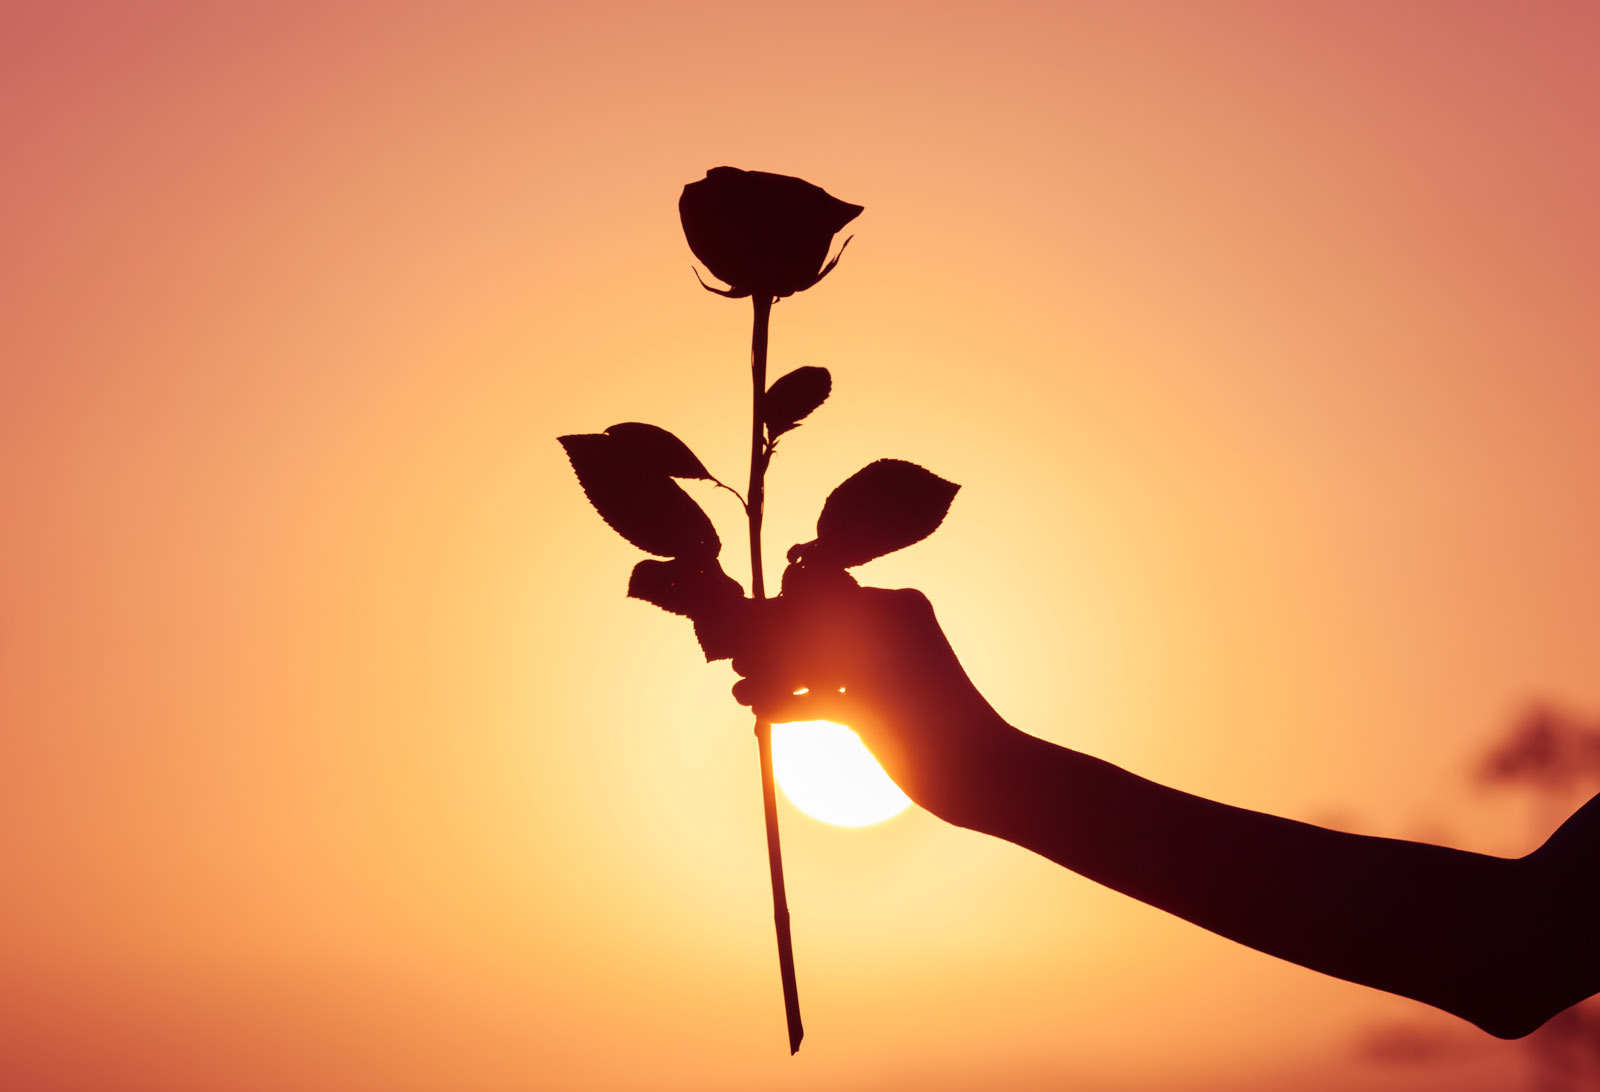 Garden Editor Mike McGrath says roses aren't the only flower to give your sweetheart this Valentine's Day. (Thinkstock)